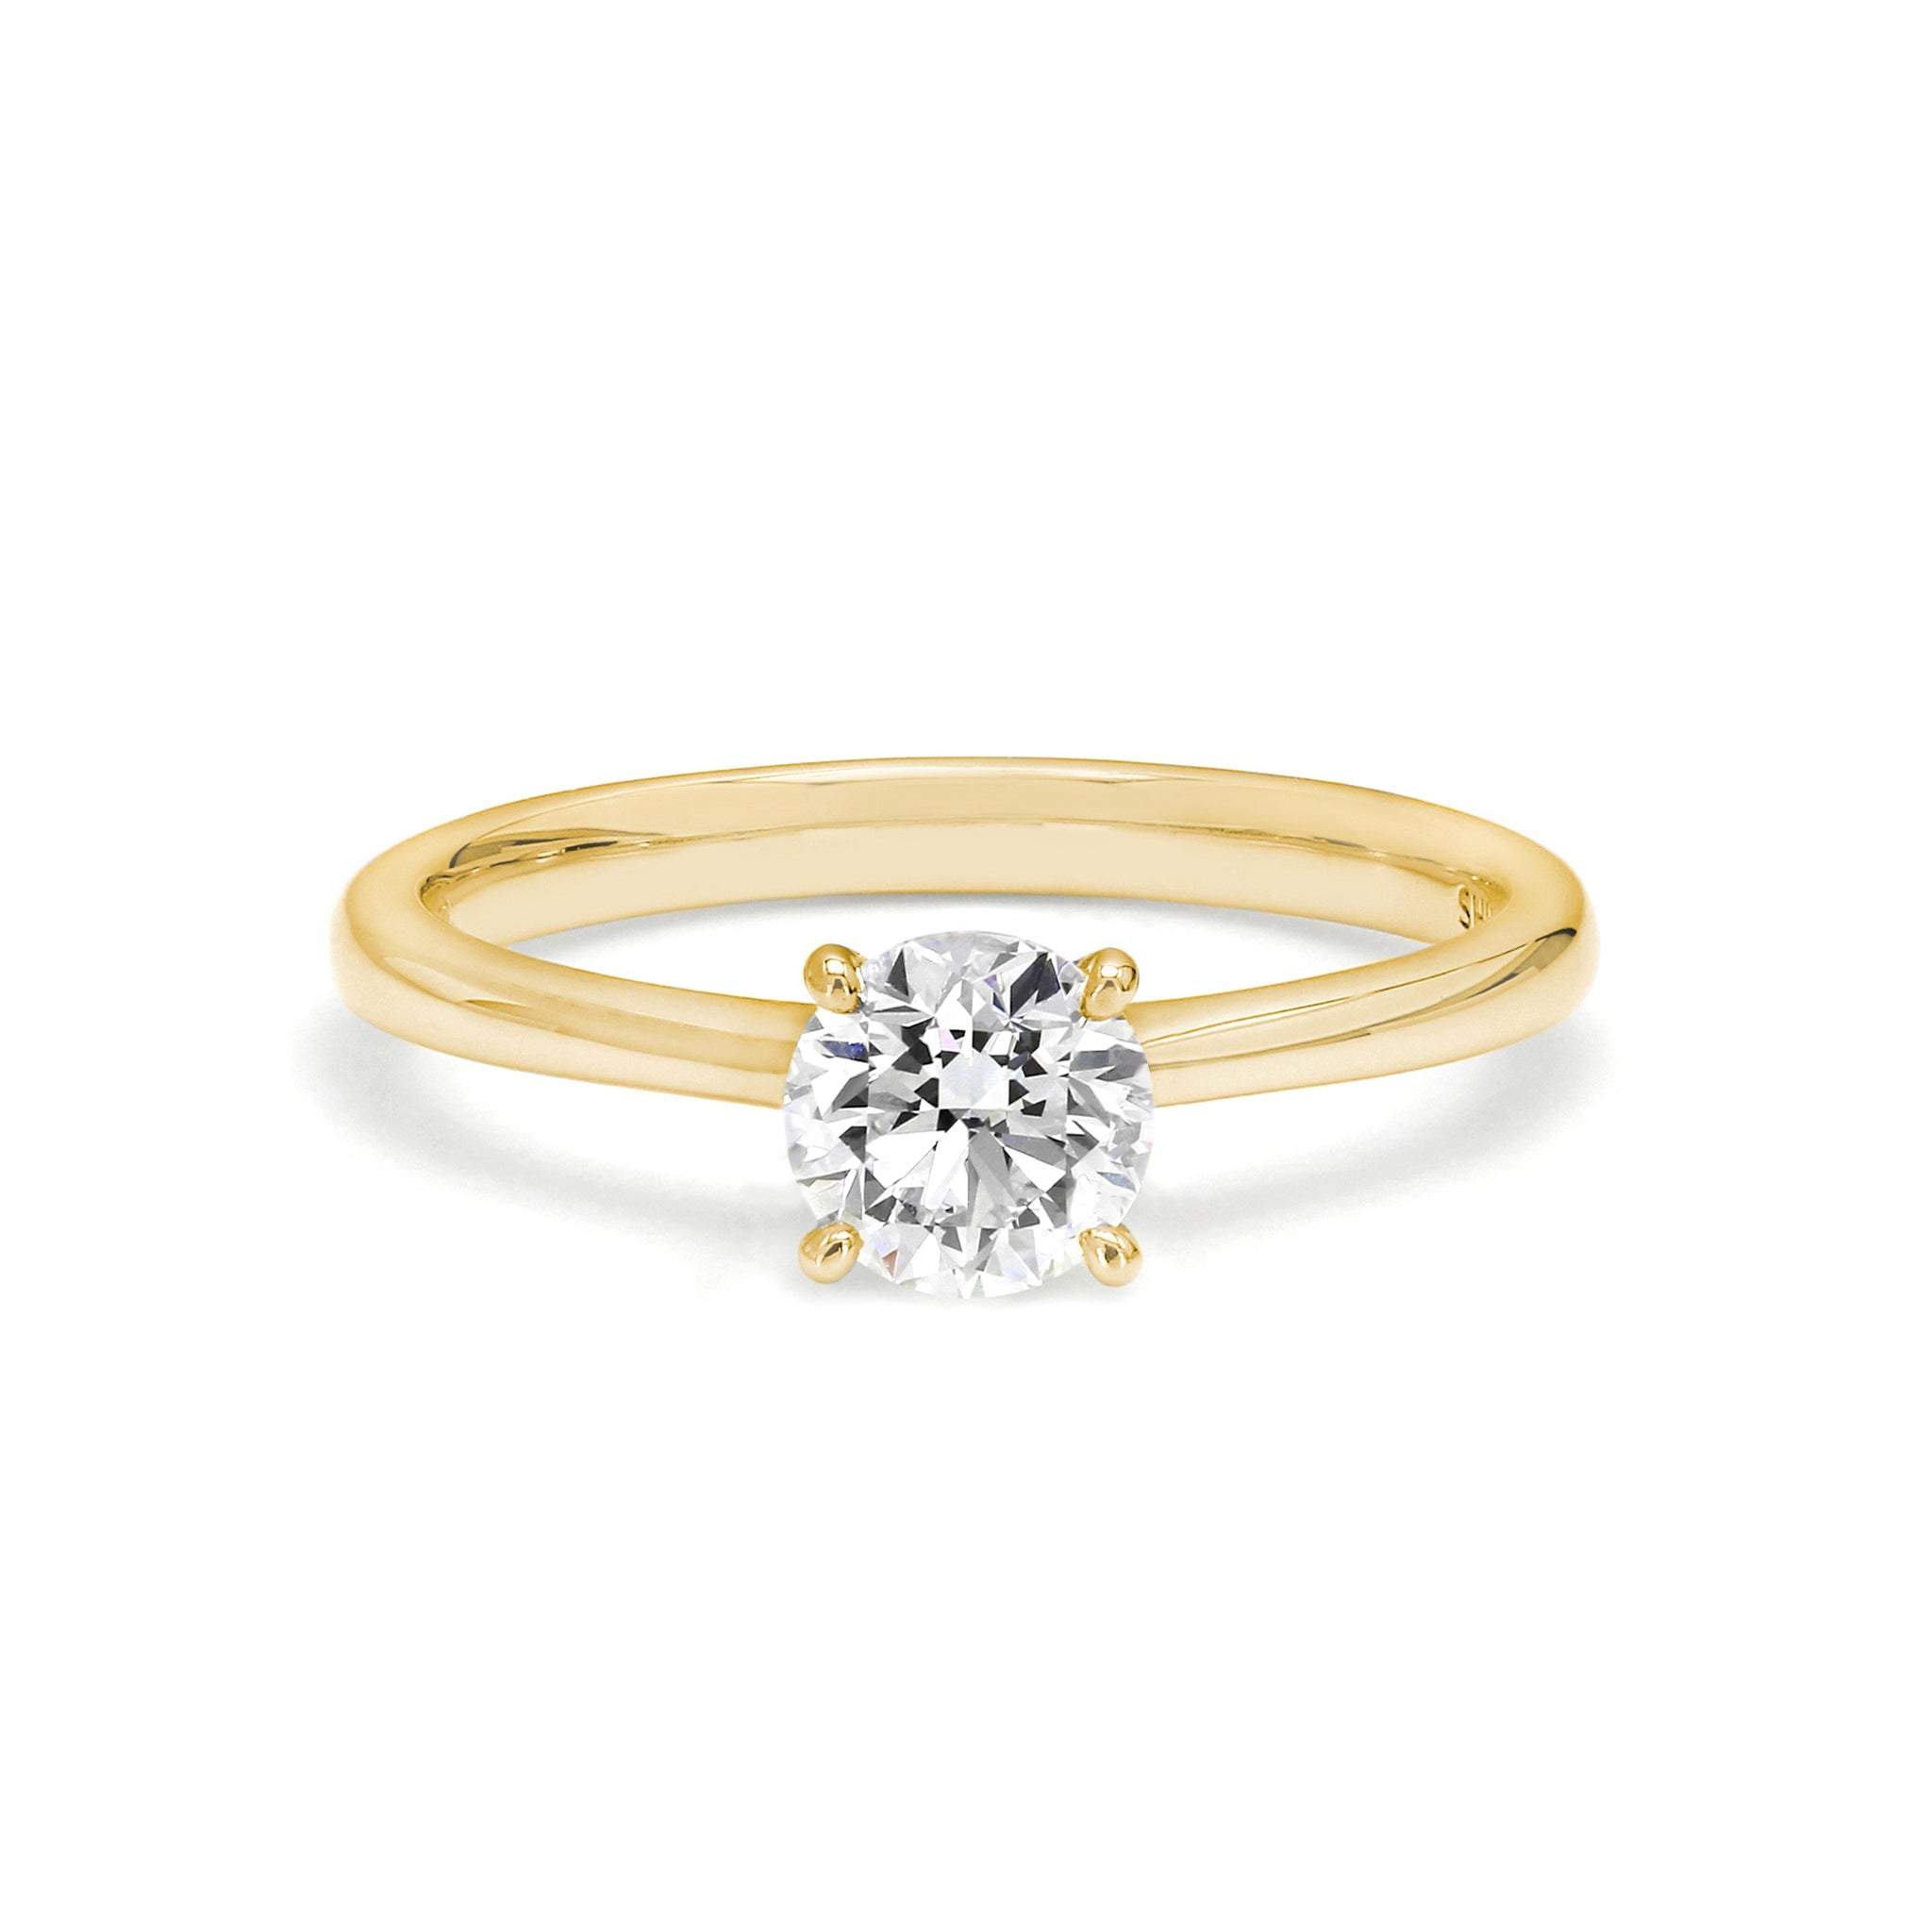 Shimansky - 4 Claw Classic Solitaire Diamond Ring 0.70ct crafted in 18K Yellow Gold